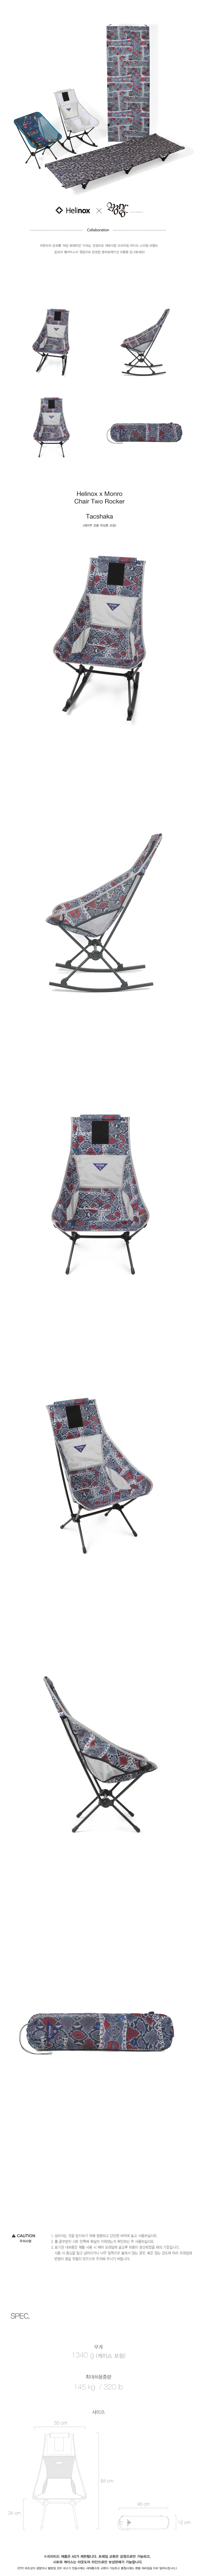 20180328_18SS-Monro-Chair-Two-Rocker_STacshaka_Front,-Side,-Back,-Case.jpg